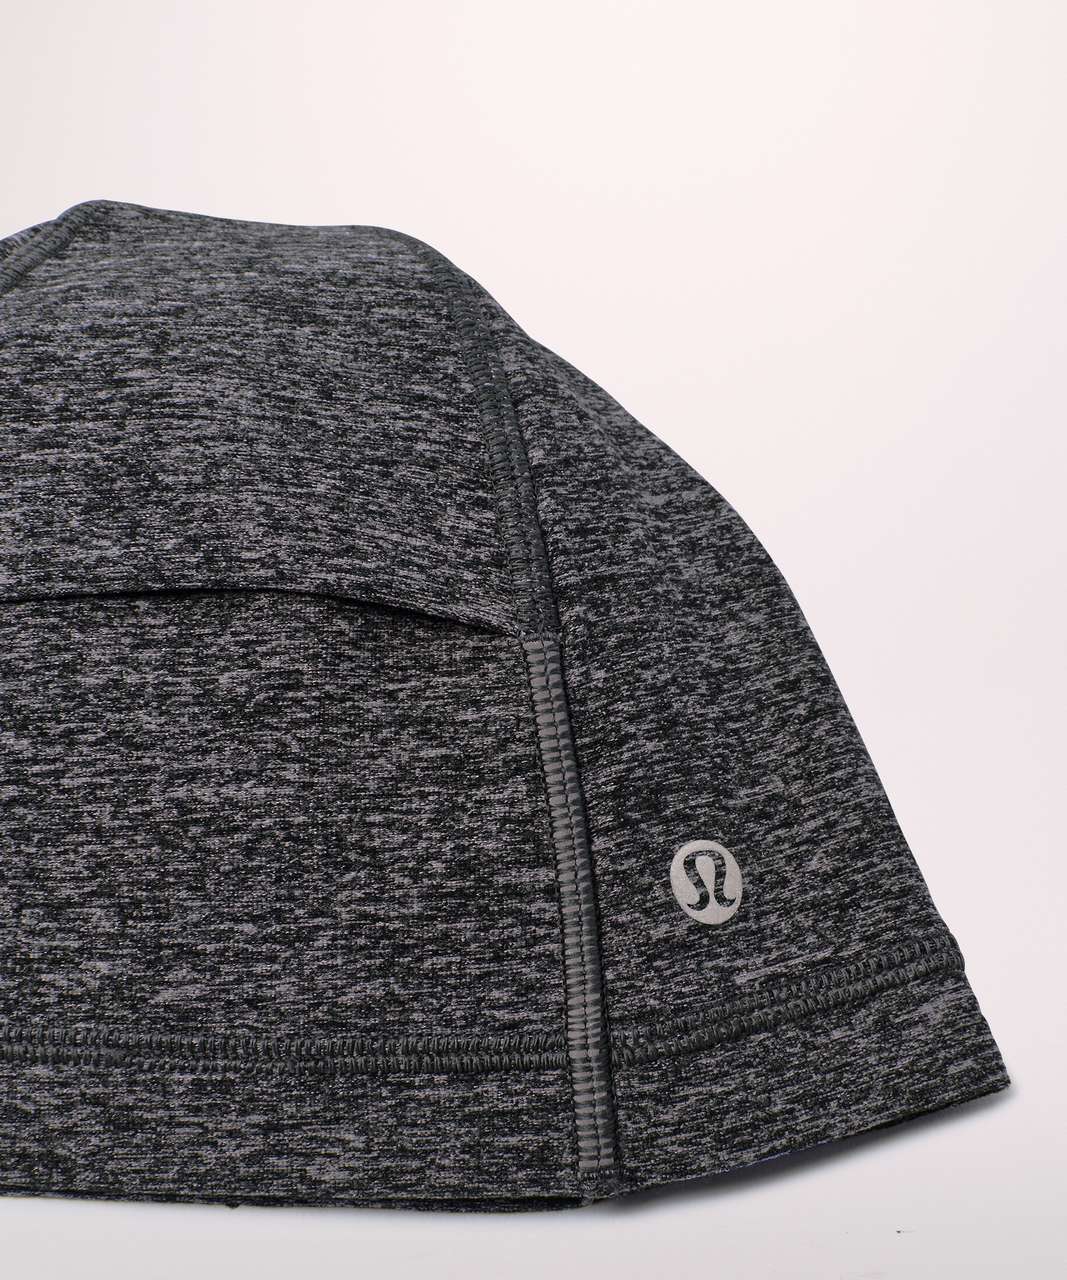 Lululemon Run It Out Toque (Special Edition) - Reconnect Heathered Black Silver Reflective